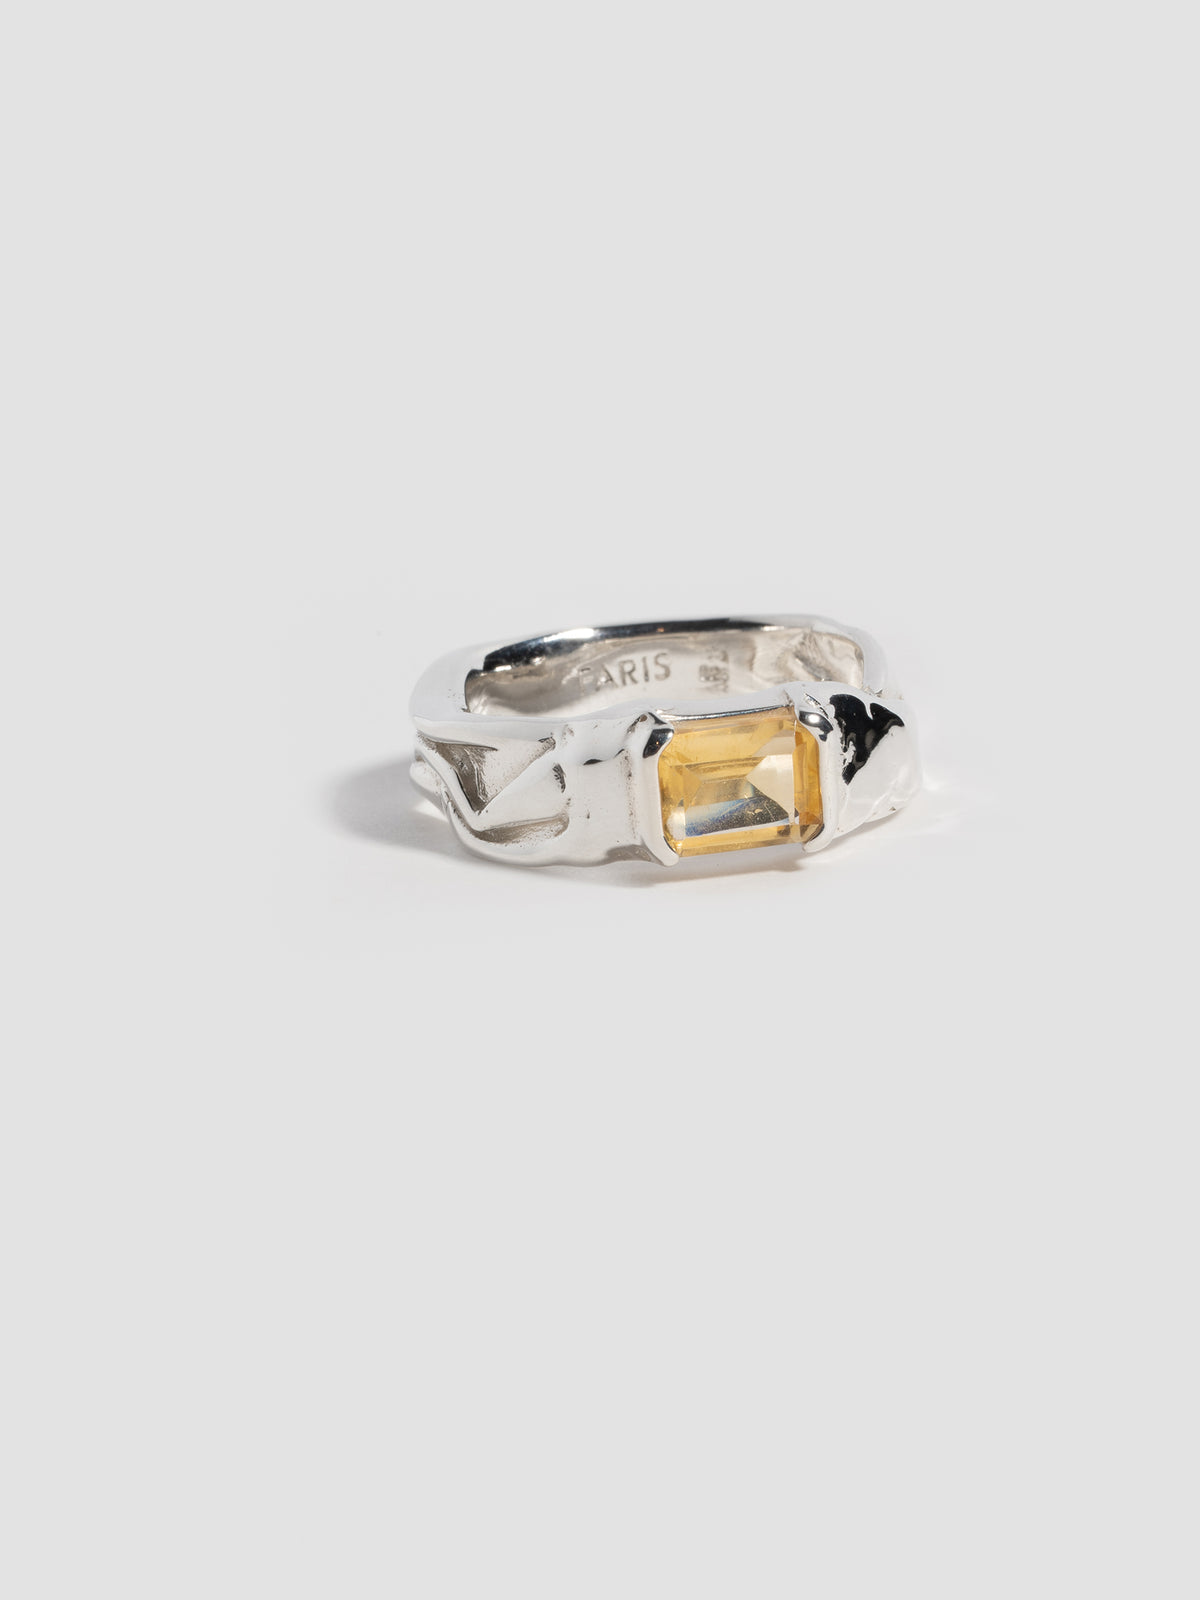 FARIS NAST Ring in sterling silver with citrine stone